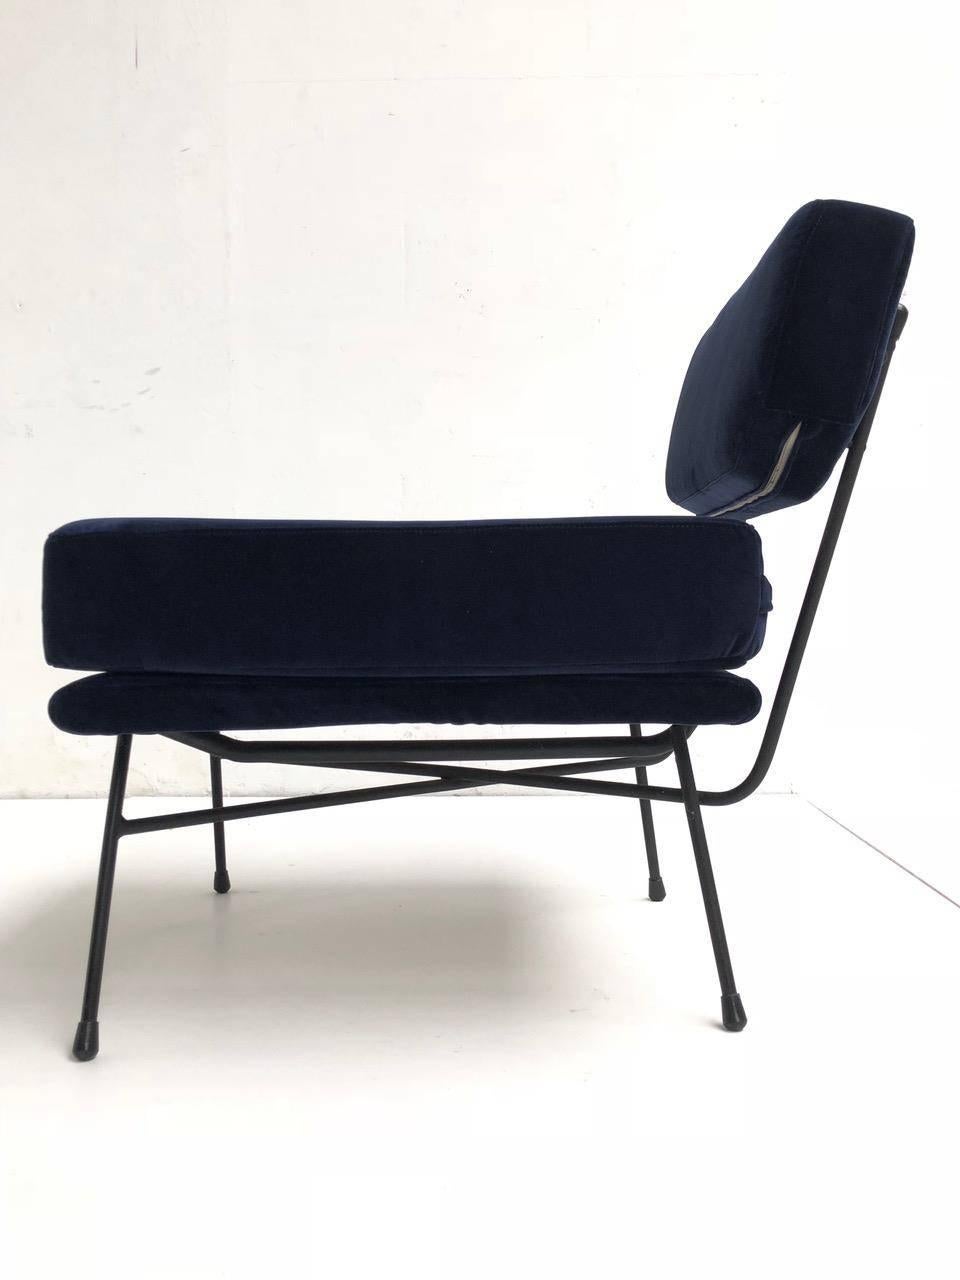 Mid-Century Modern Pair of 'Elettra' Lounge Chairs by BBPR , Arflex, Italy 1953, Compasso D'Oro 1954